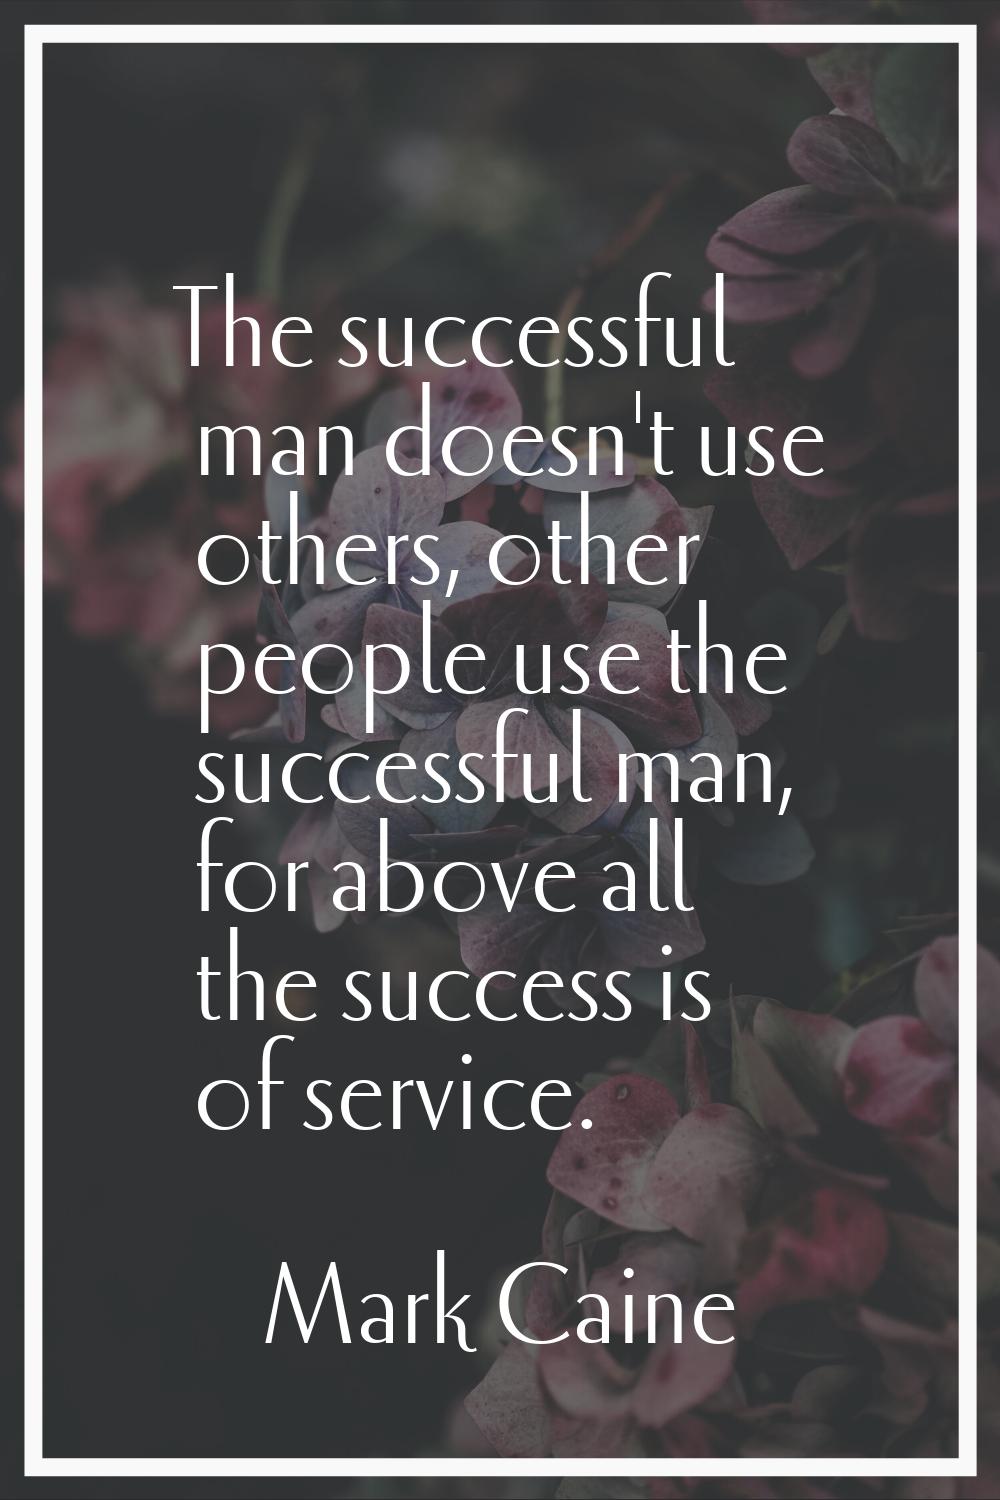 The successful man doesn't use others, other people use the successful man, for above all the succe